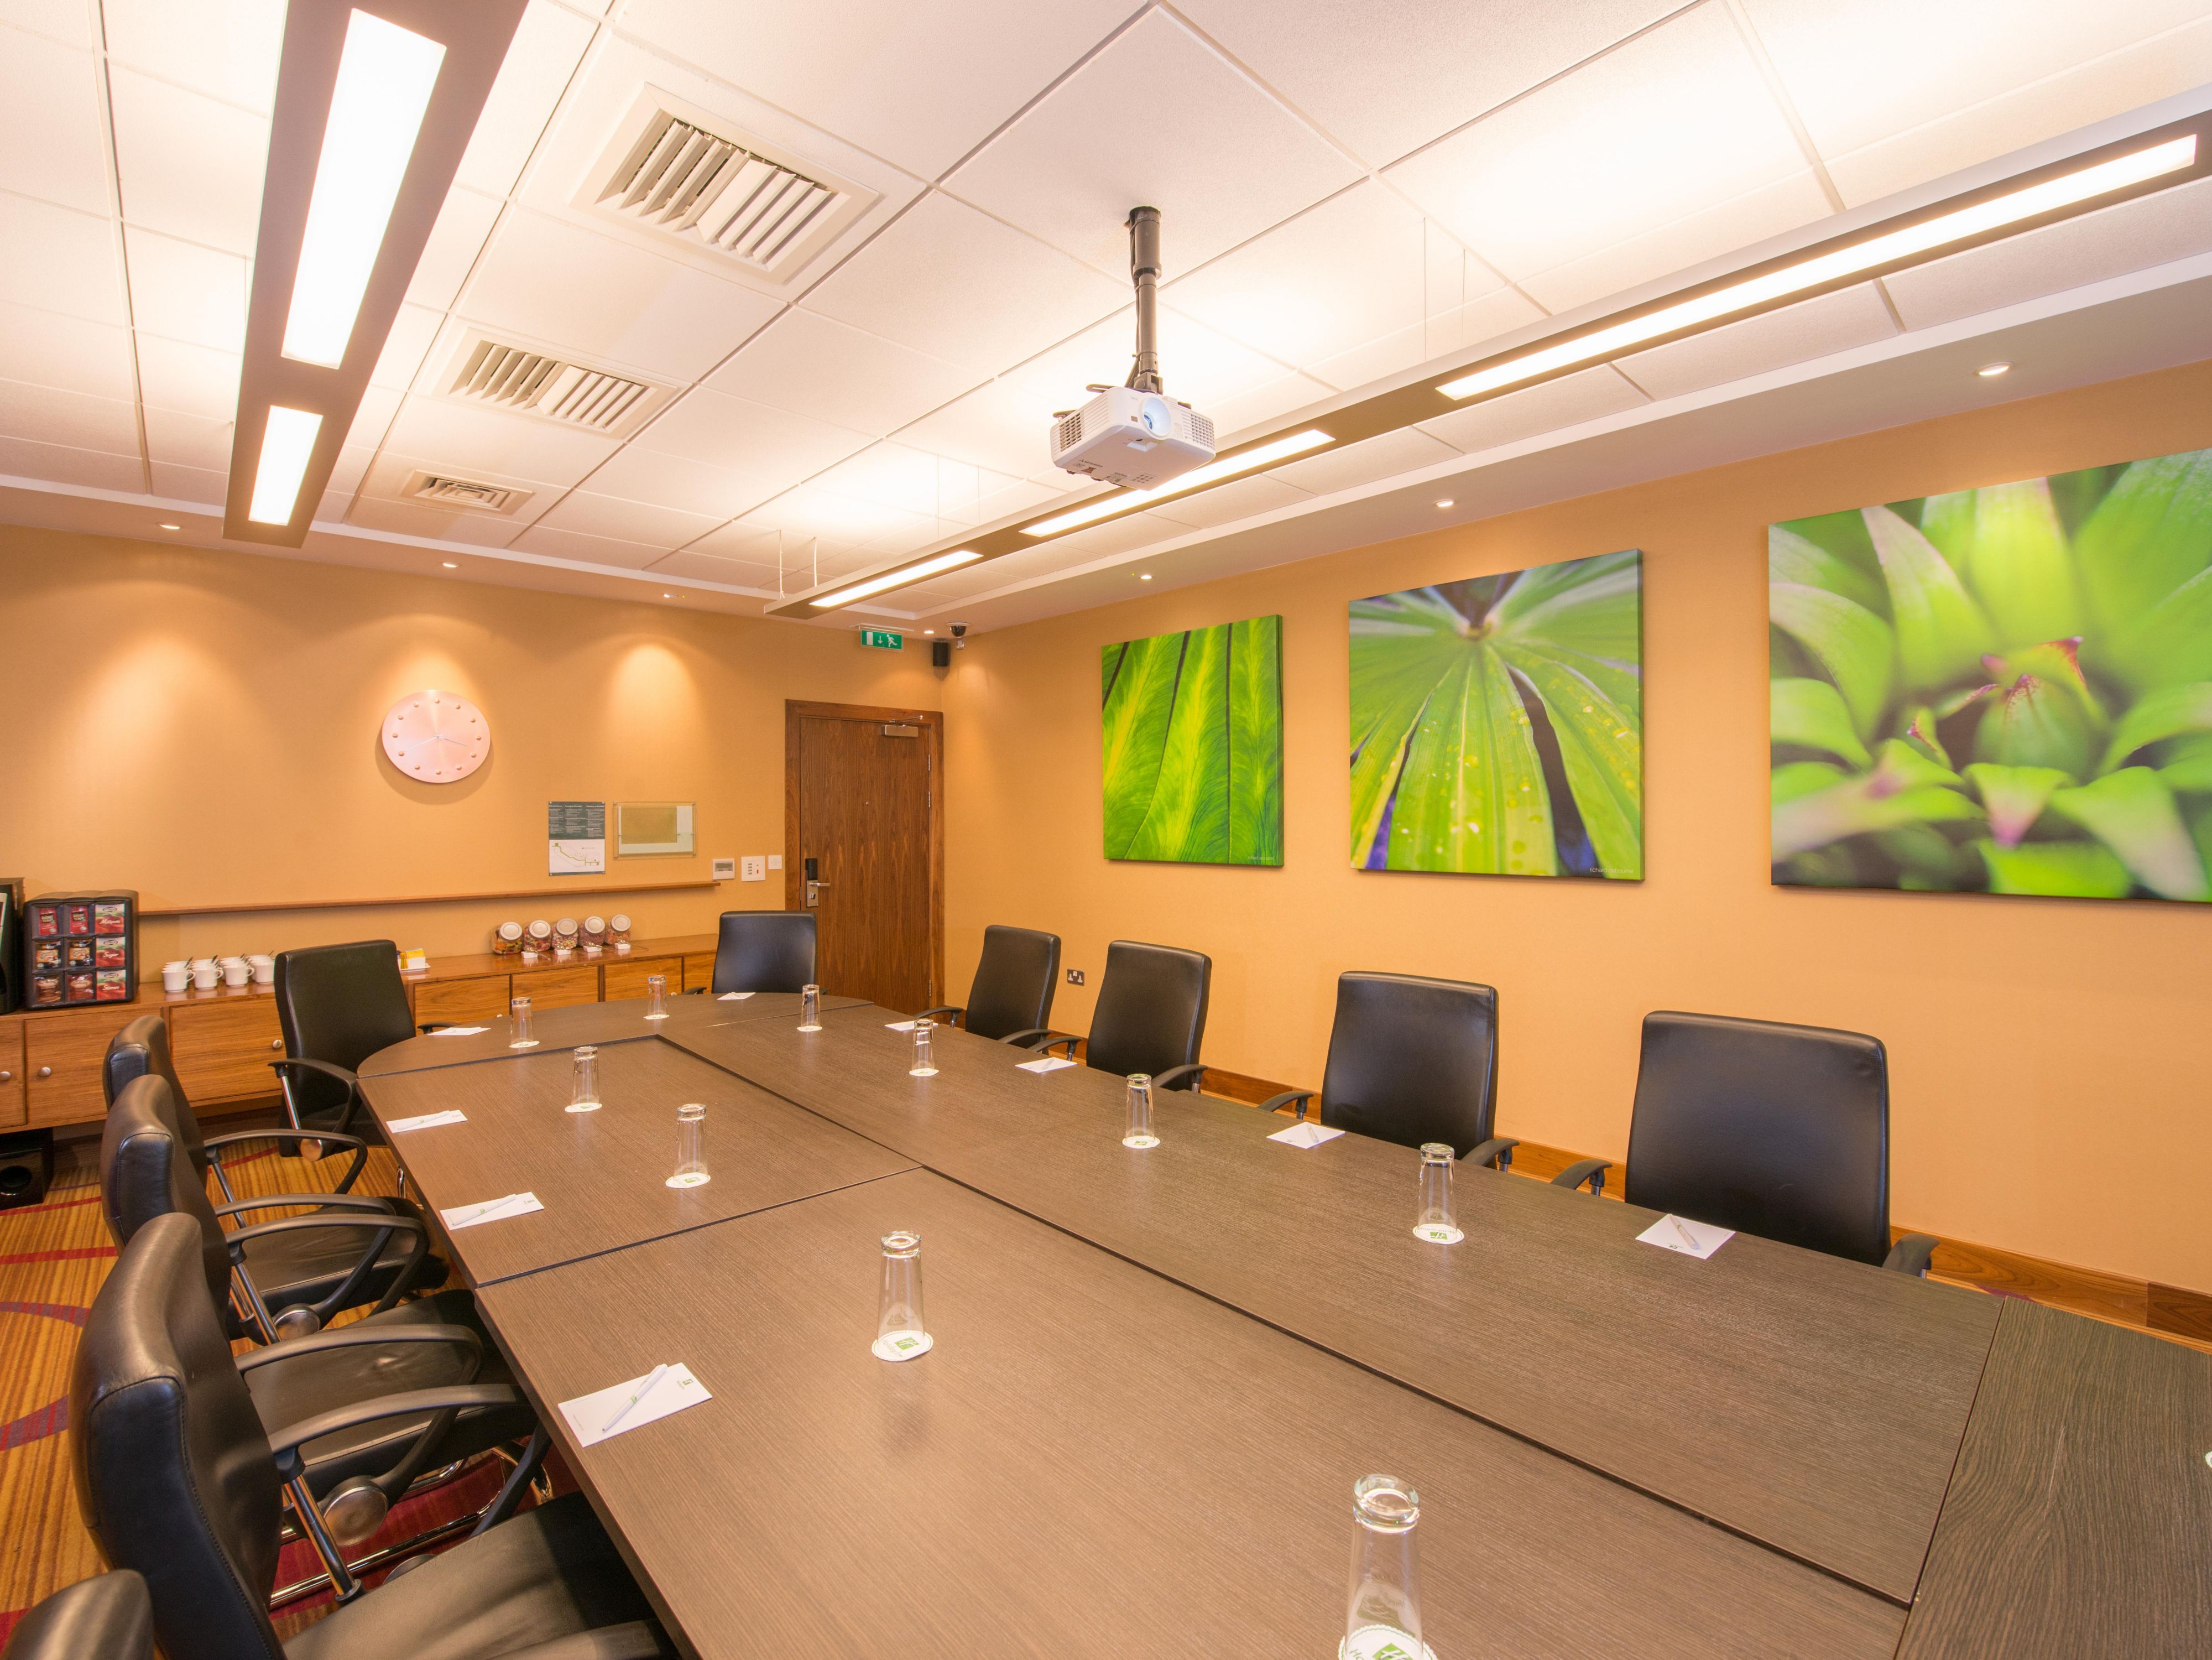 Looking to host your next meeting or event? We have plenty of spaces and experienced staff to ensure your day runs smoothly.